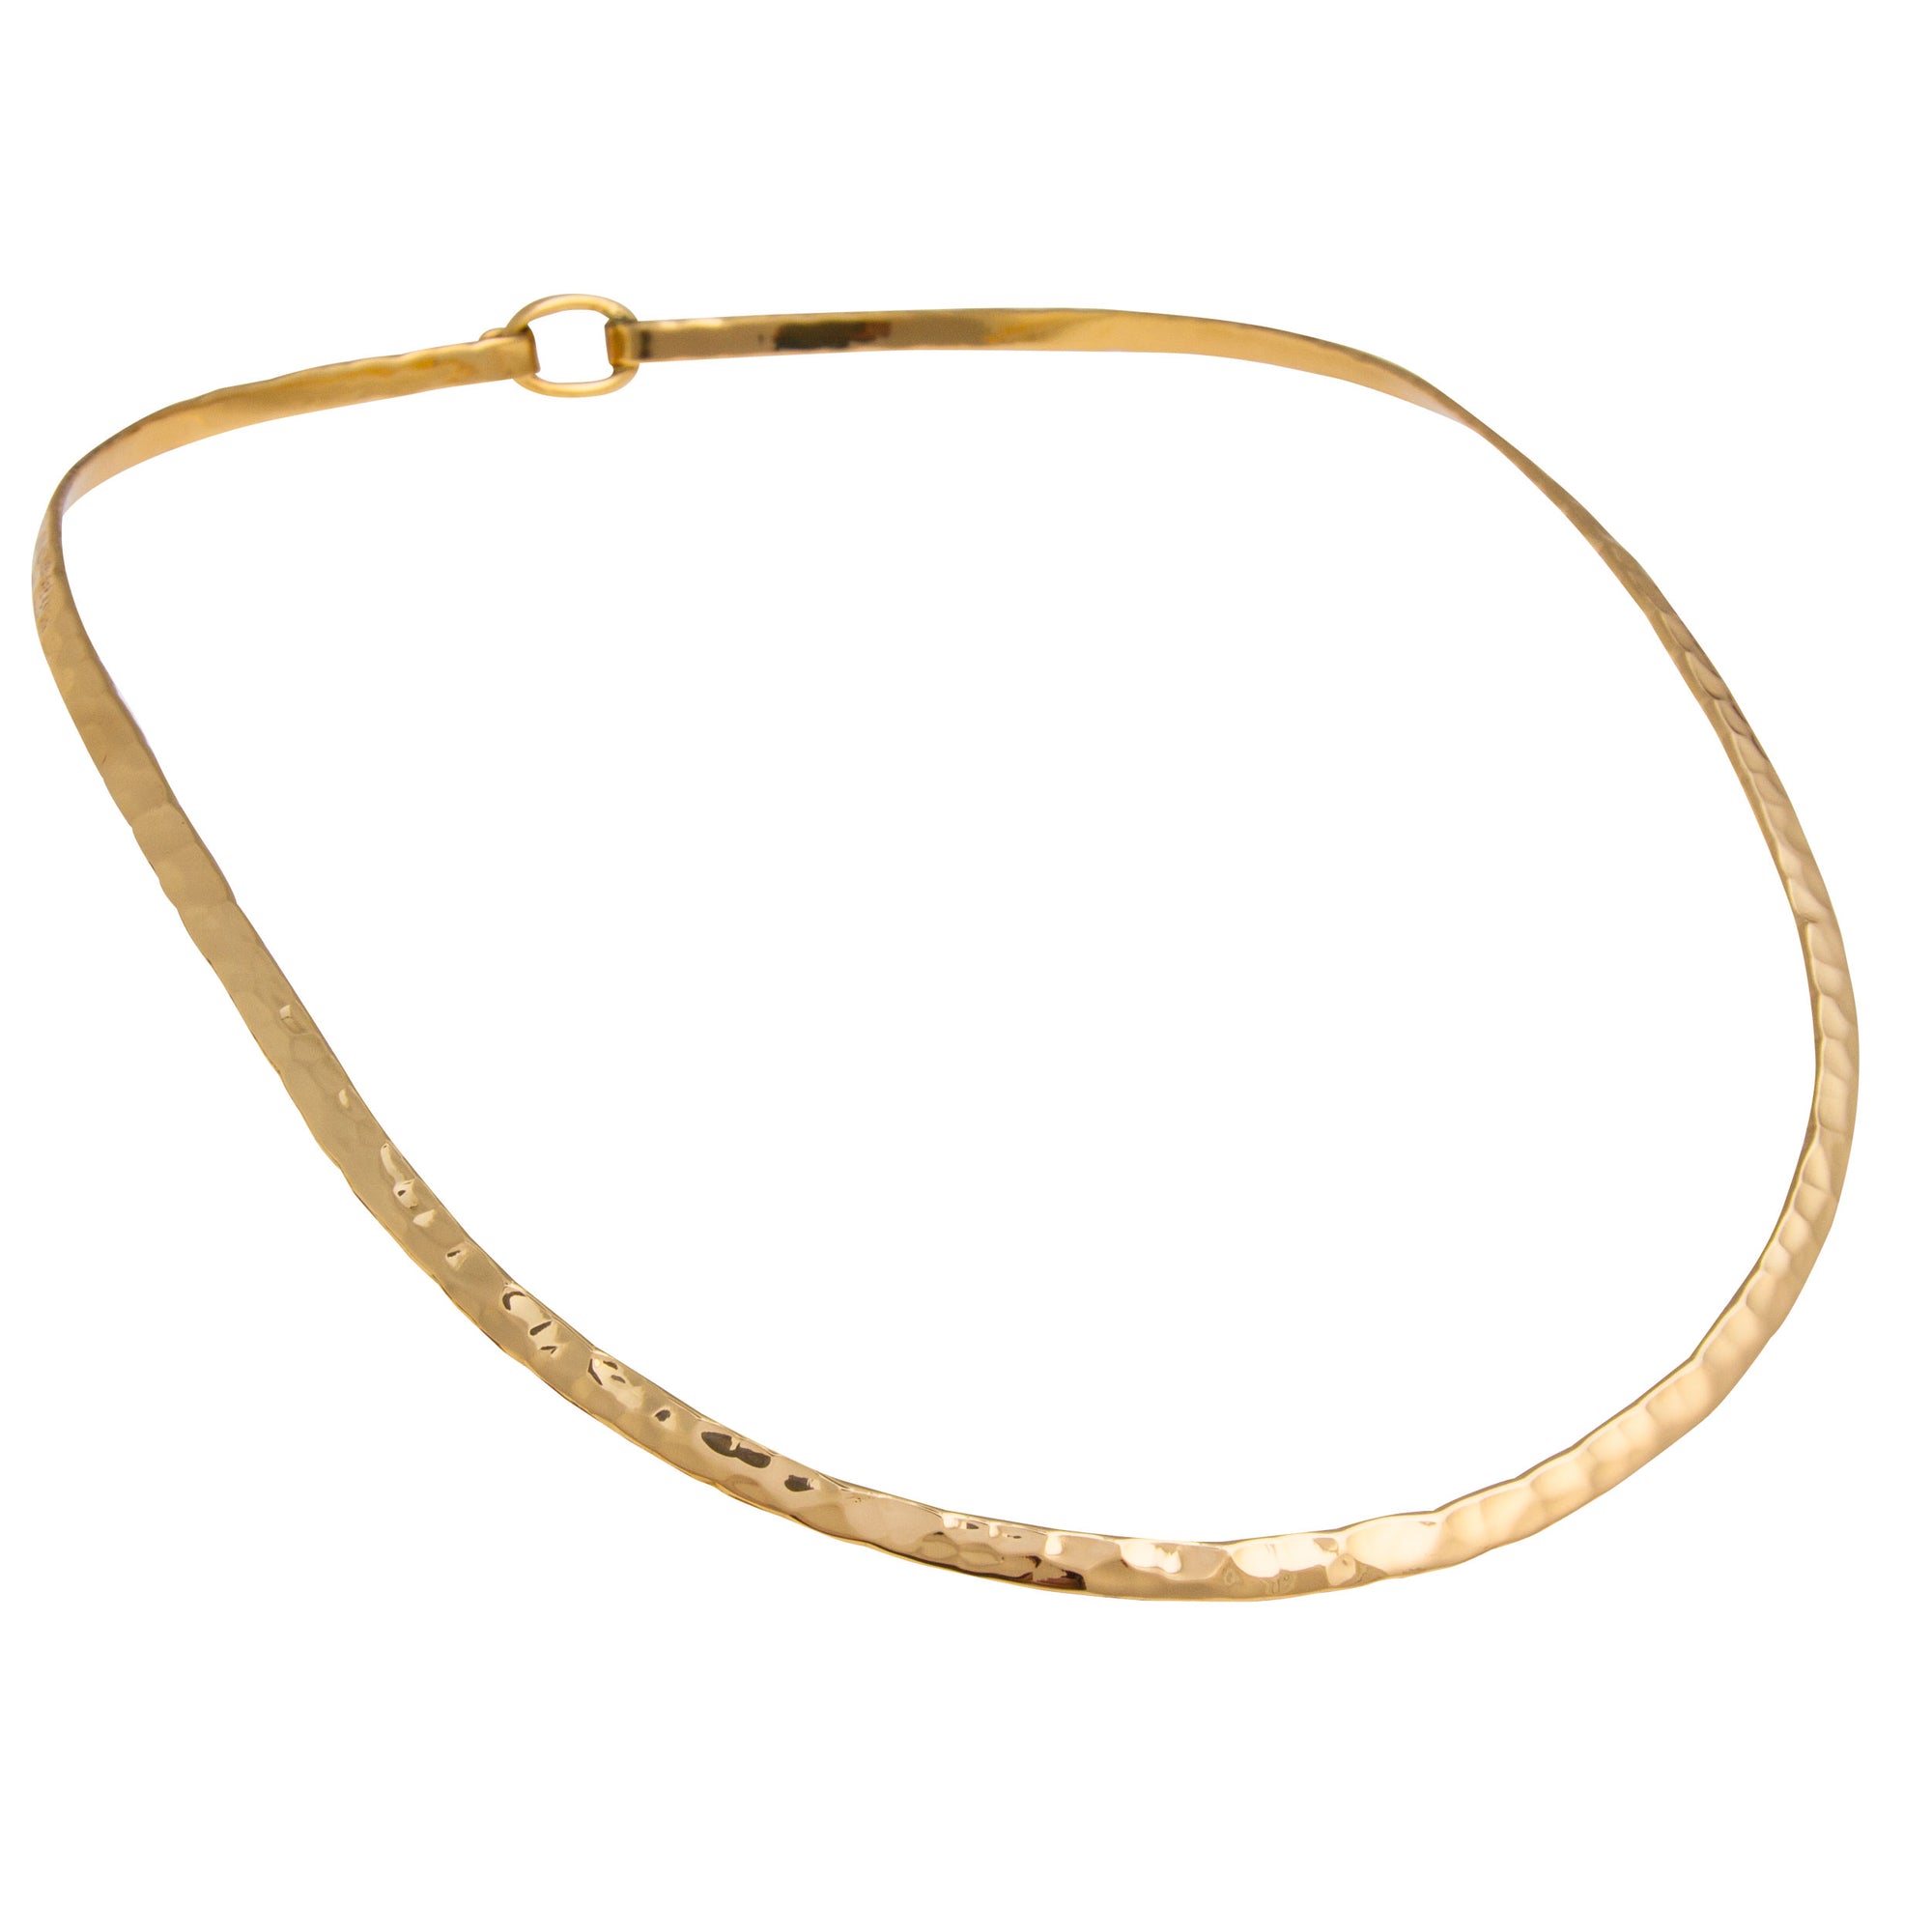 Alchemia Hammered Oval Neckwire with Clasp | Charles Albert Jewelry